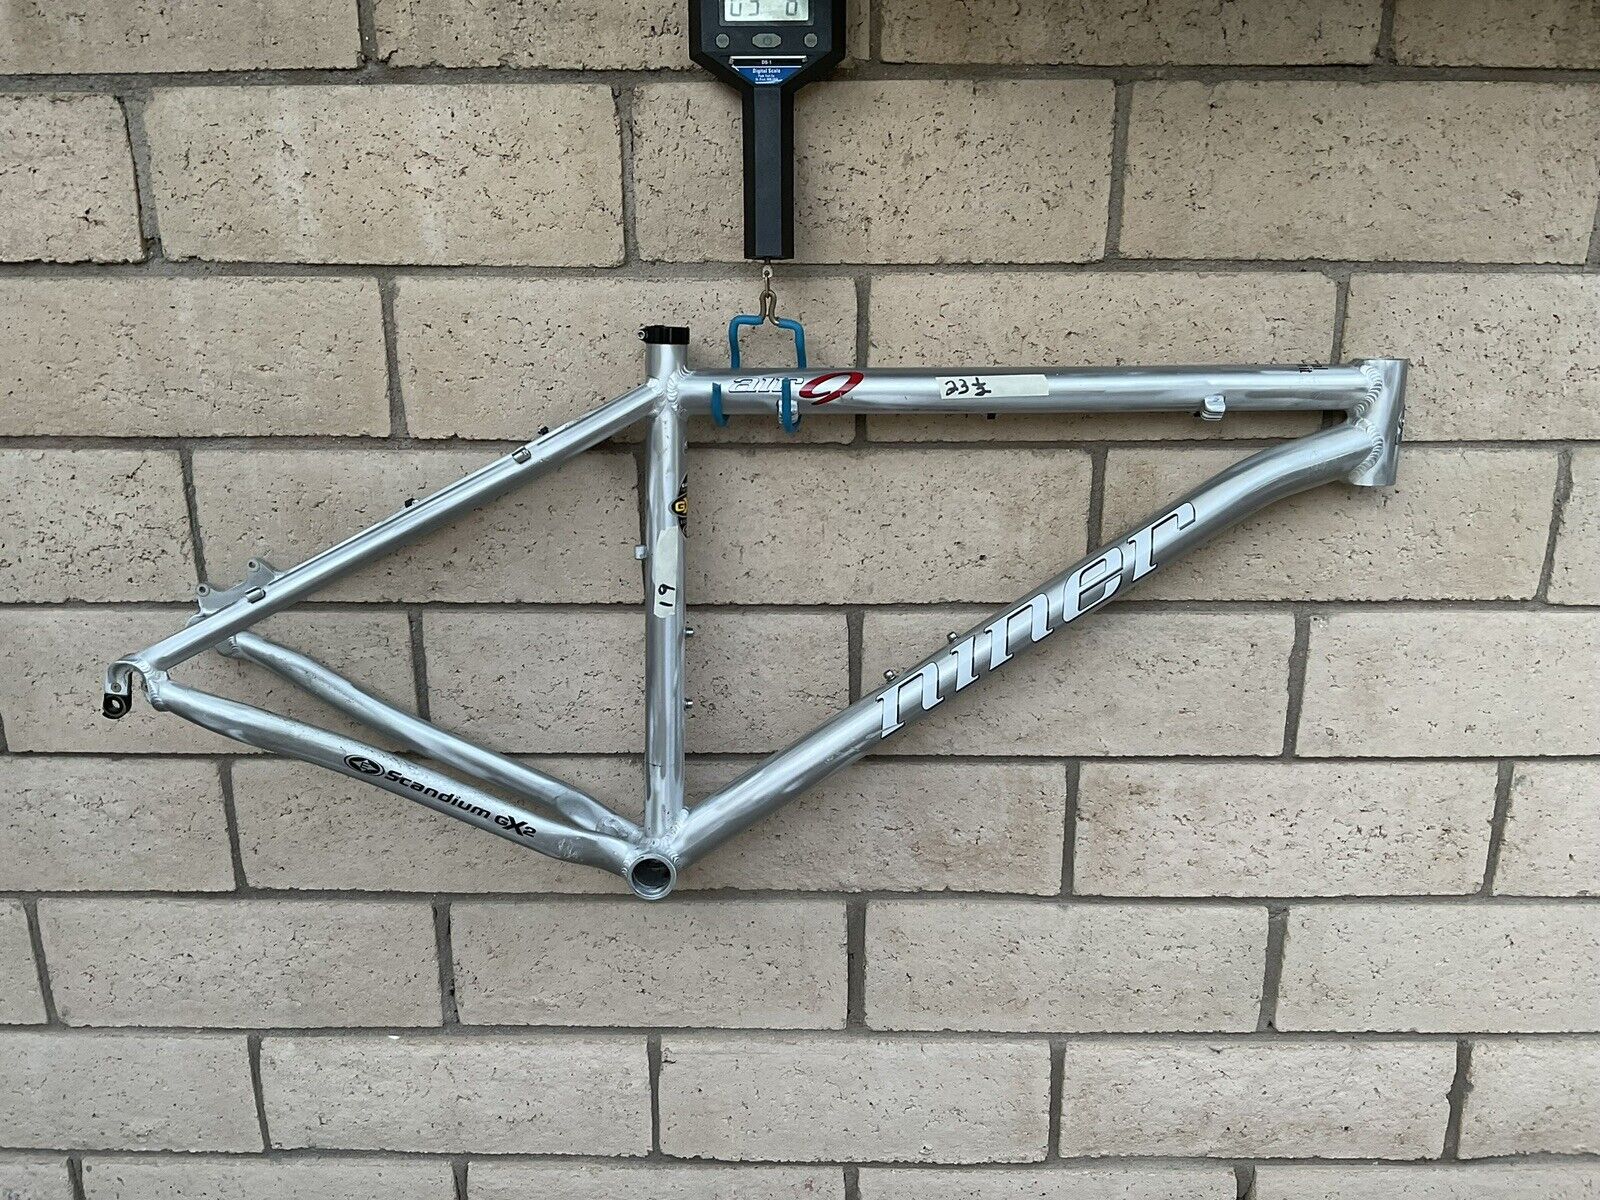 Niner Air 9 Aluminum, 29 inch Frame In Nice Condition 19”